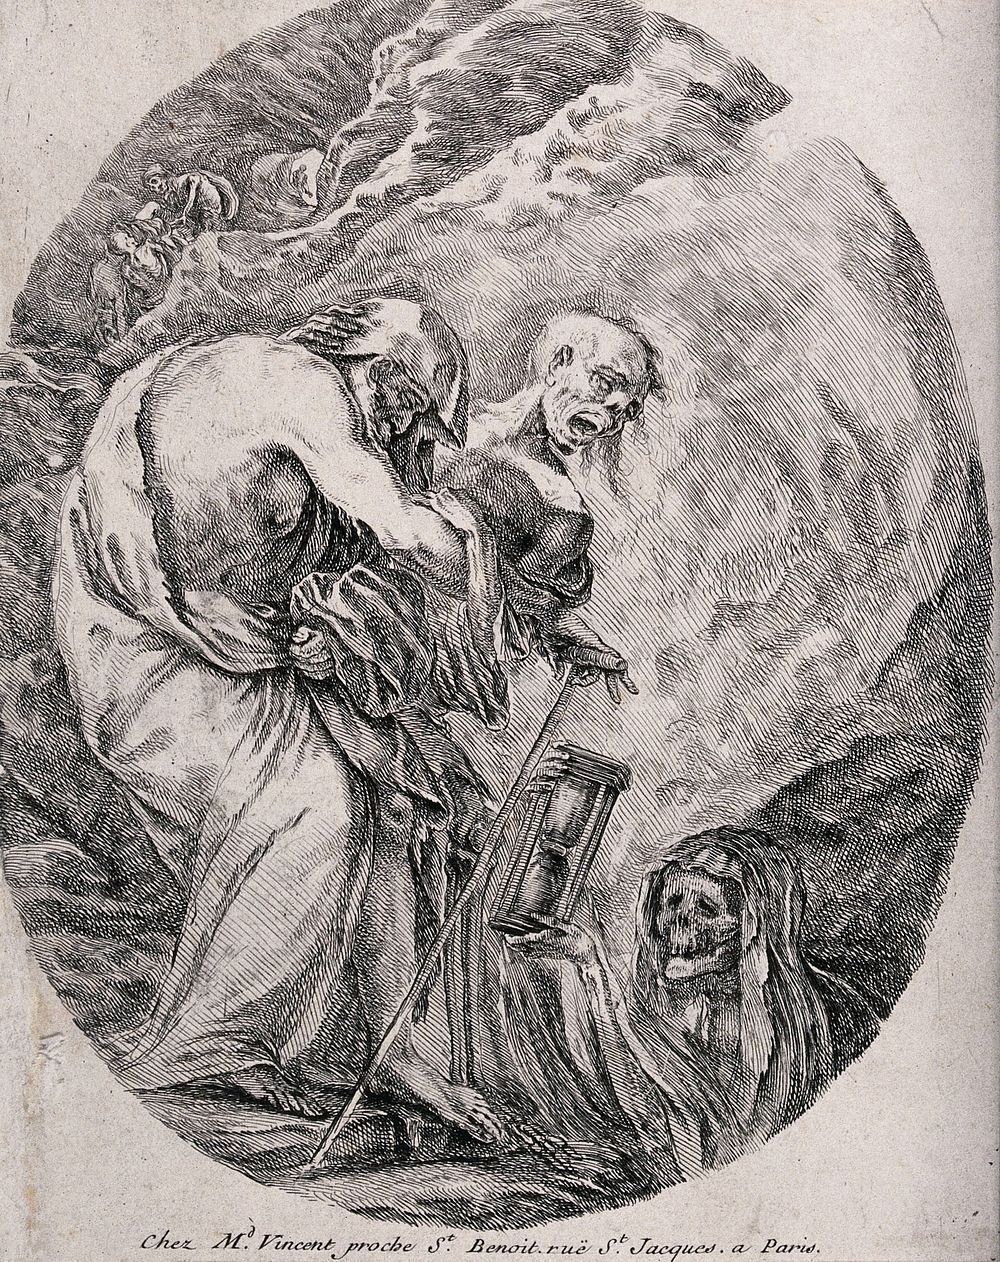 Figures of Death lead an old and blind man over a cliff. Etching.